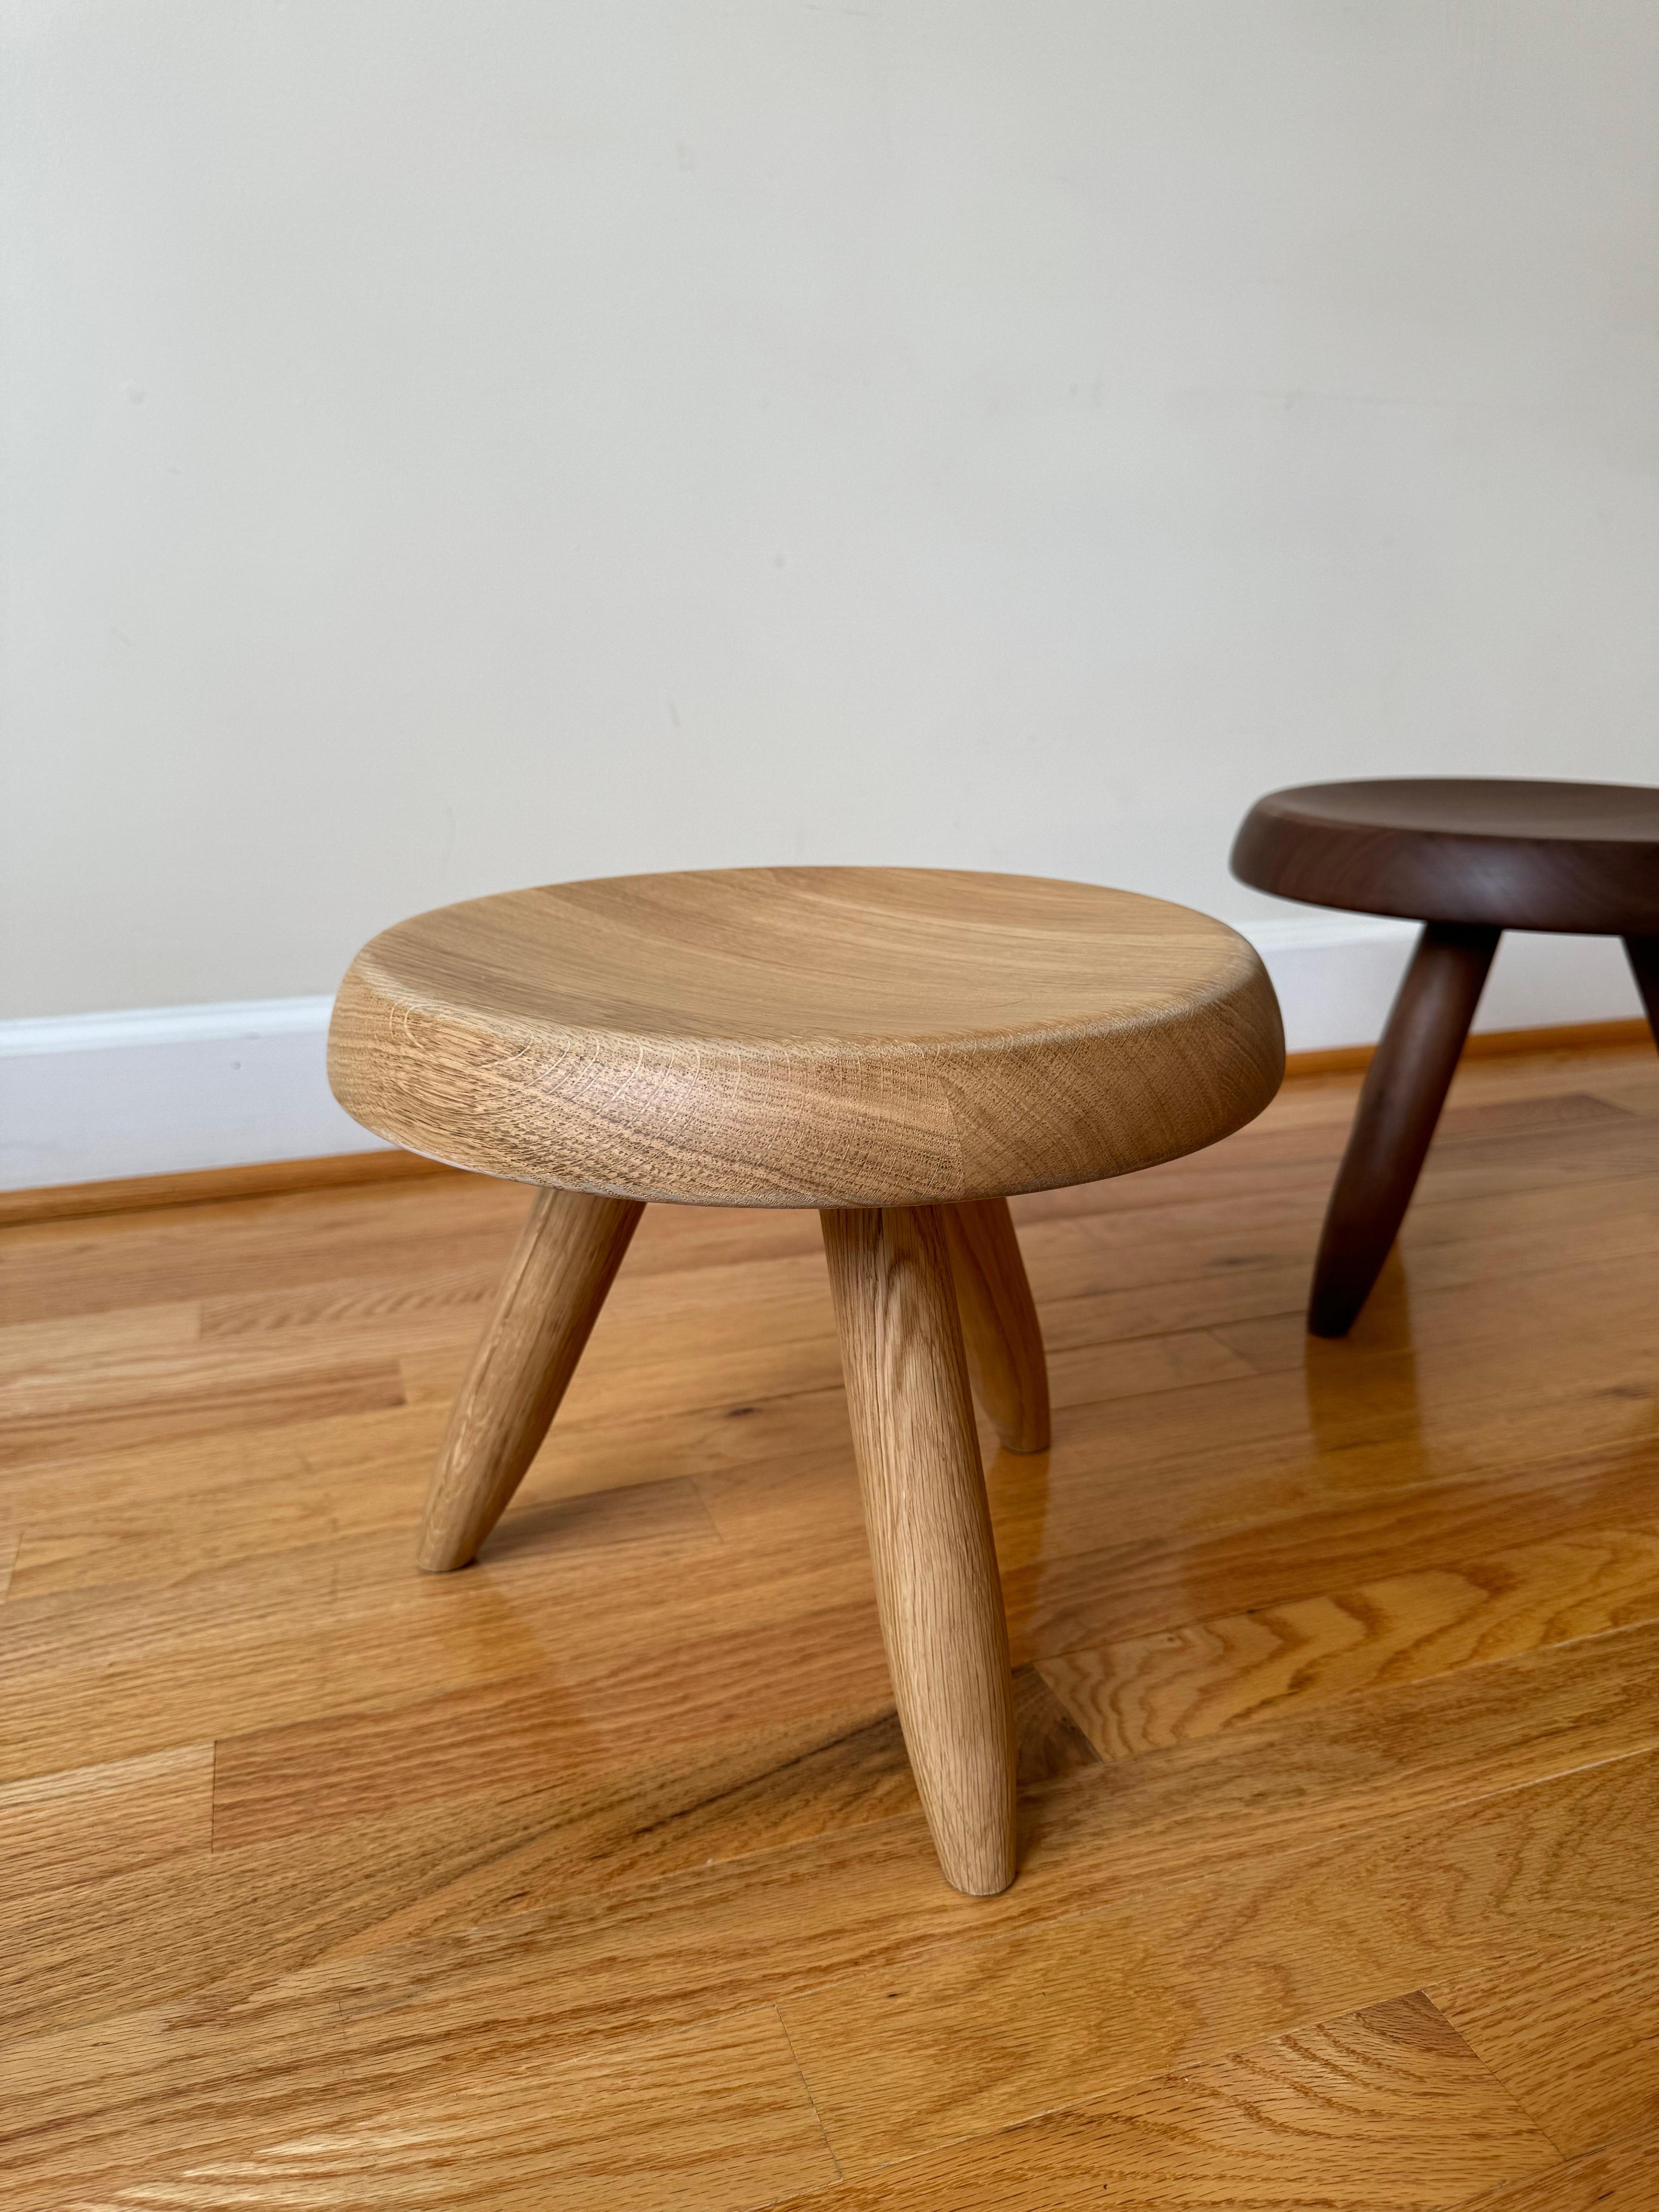 Tabouret Berger (Berger Stool) by Charlotte Perriand for Cassina In Excellent Condition For Sale In Centreville, VA